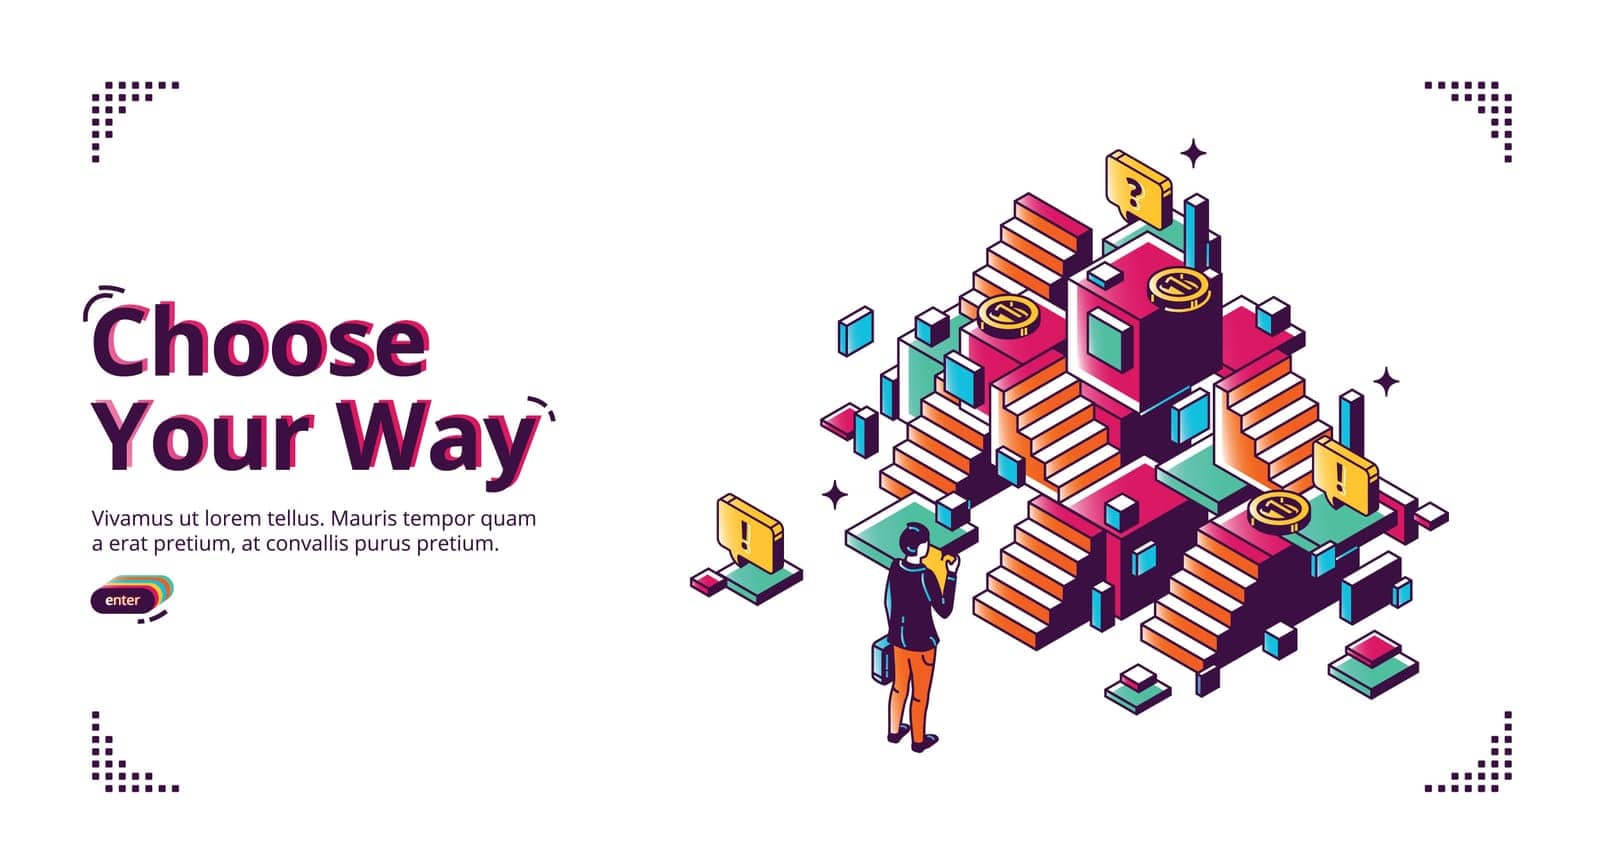 Choose your way banner. Career development concept. Vector landing page of planning life direction with isometric illustration of businessman making decision in front of confused stairs